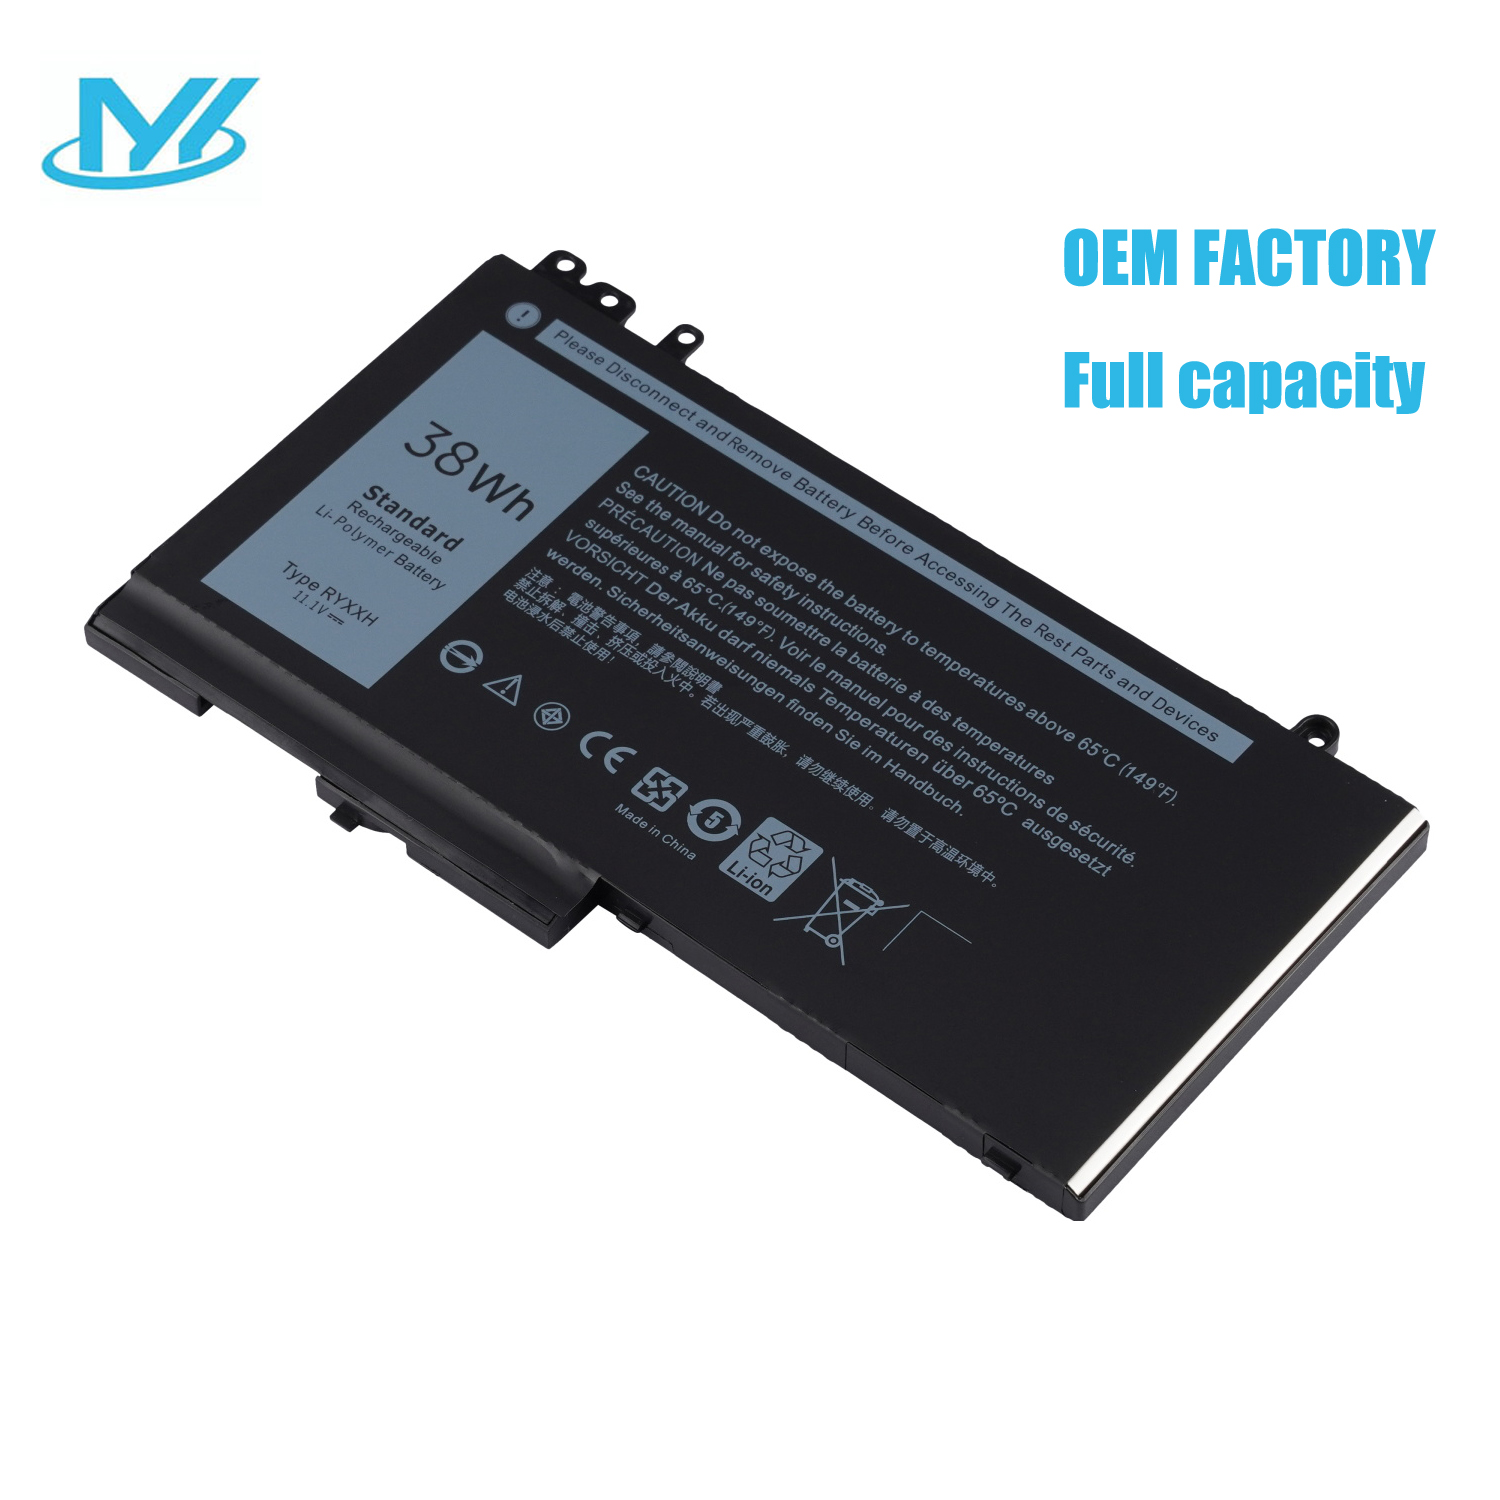 RYXXH replacement lithium ion Notebook battery Laptop battery 09P4D2 9P4D2 05TFCY 0YD8XC 11.1 V 38Wh for Dell laptop E5250 E5450 E5550 